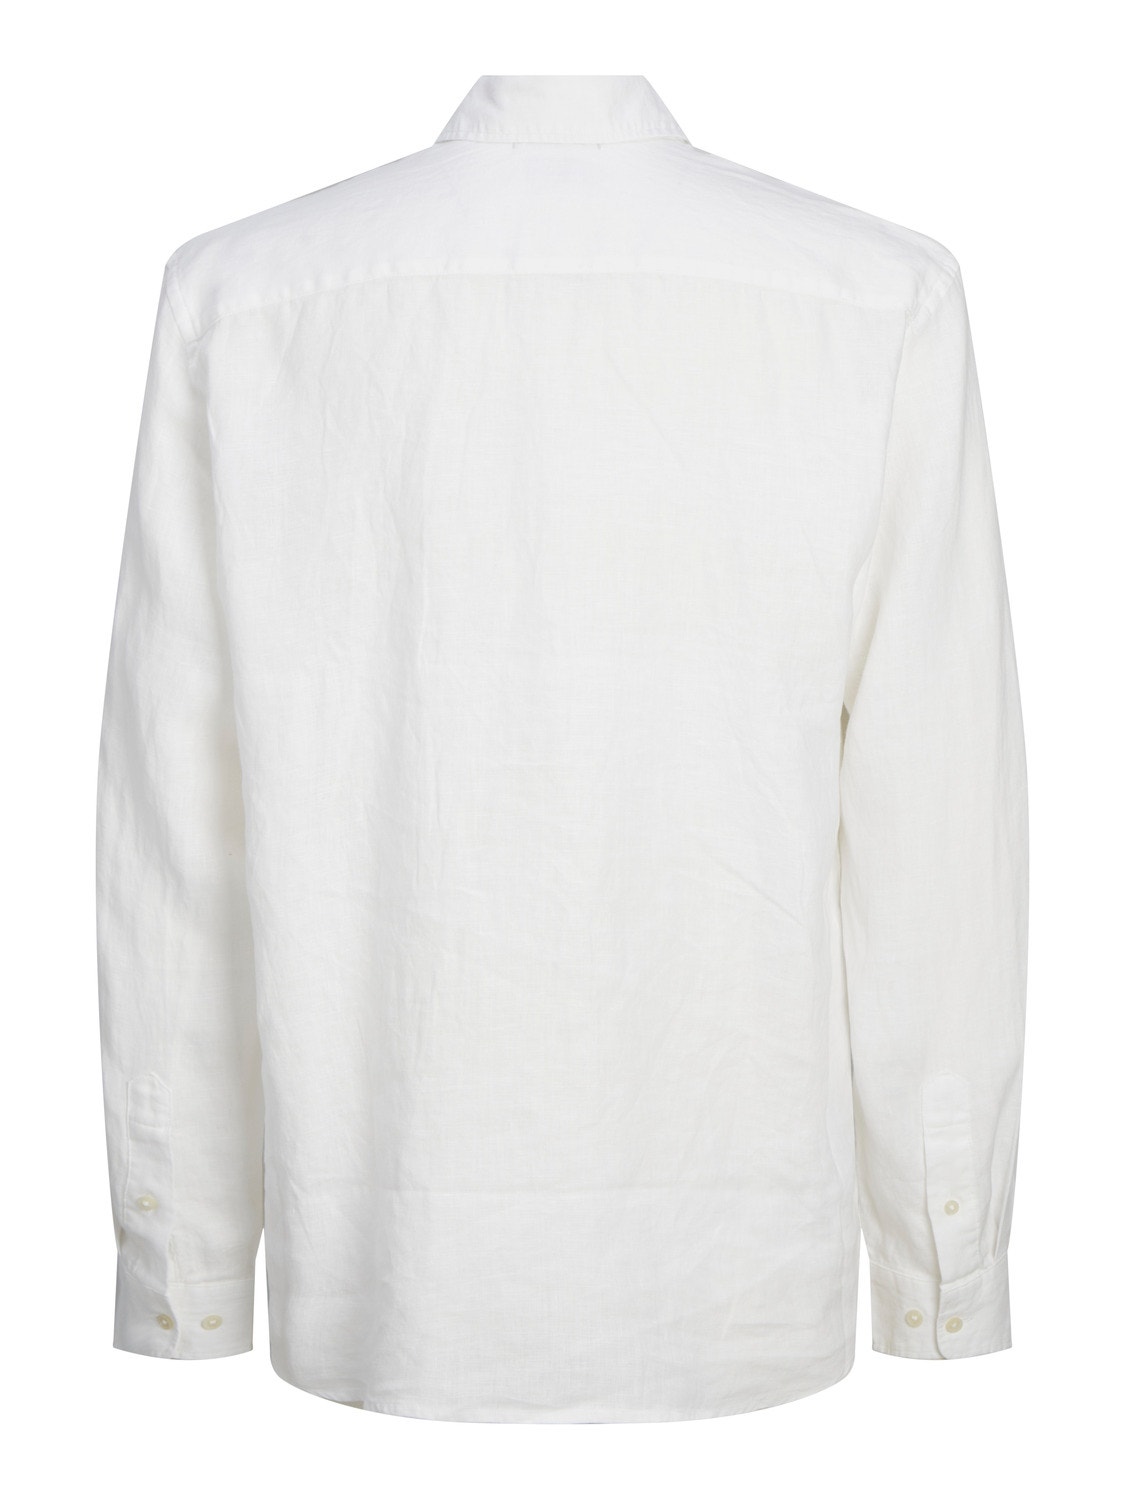 Jack & Jones Camisa Relaxed Fit -Bright White - 12251844